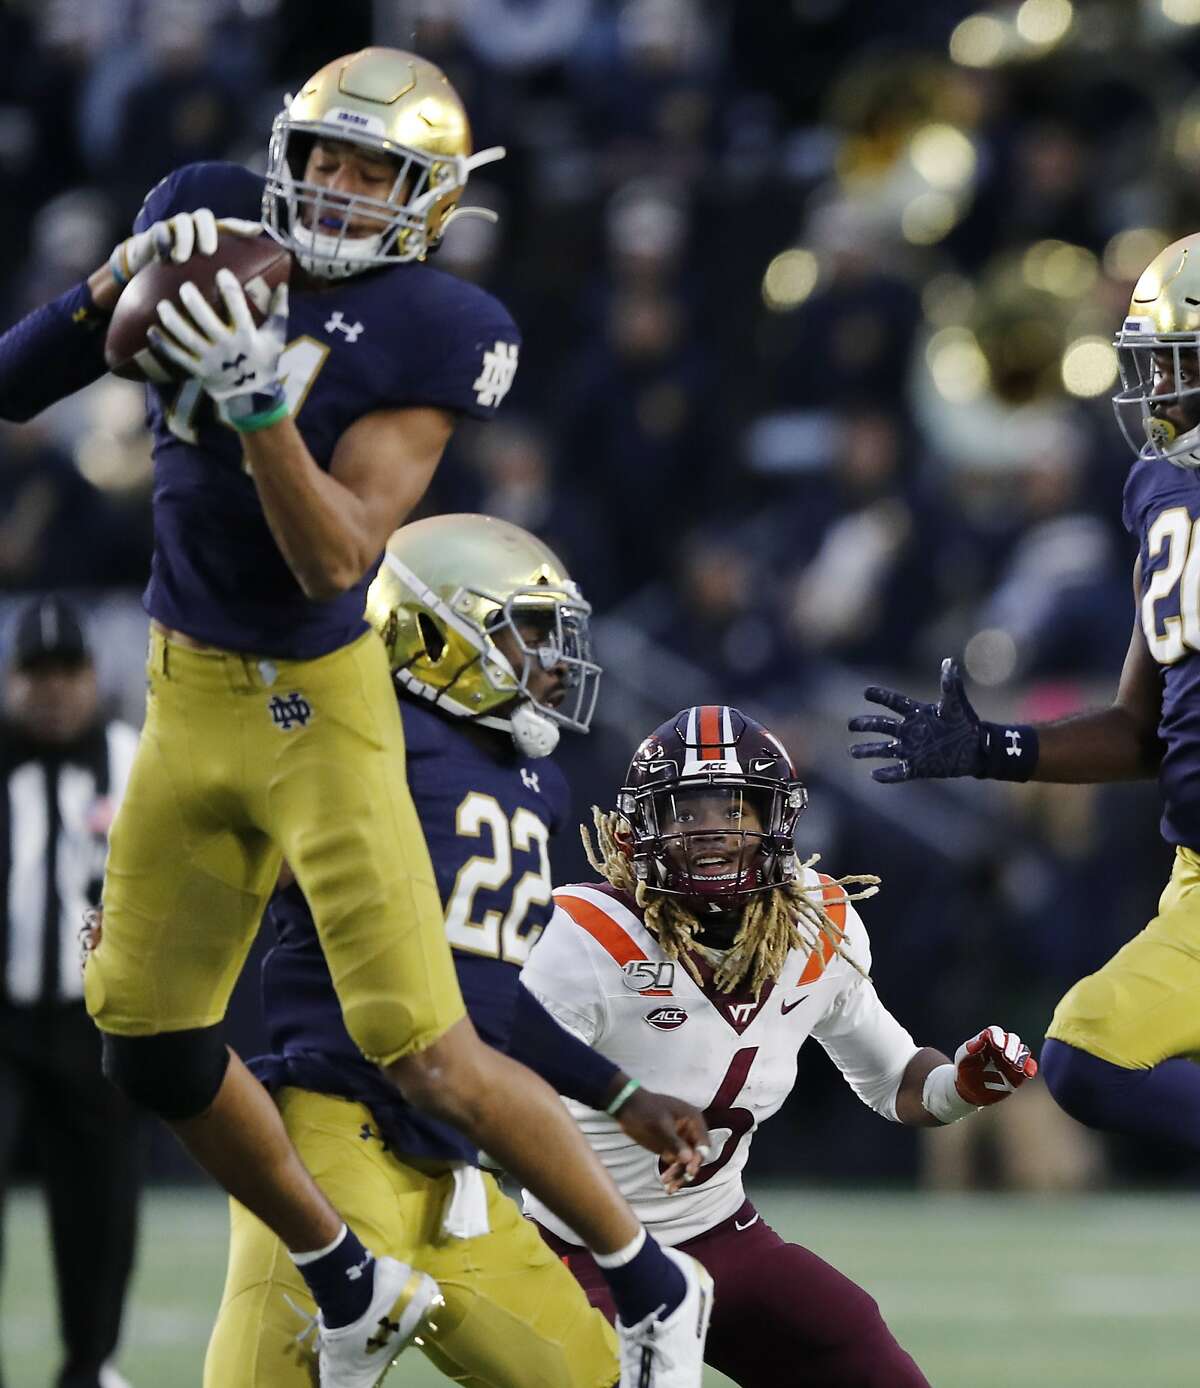 Notre Dame defensive back Kyle Hamilton (14) intercepts a pass intended for Virginia Tech wide receiver Hezekiah Grimsley (6) during the second half of an NCAA college football game, Saturday, Nov. 2, 2019, in South Bend, Ind. (AP Photo/Carlos Osorio)